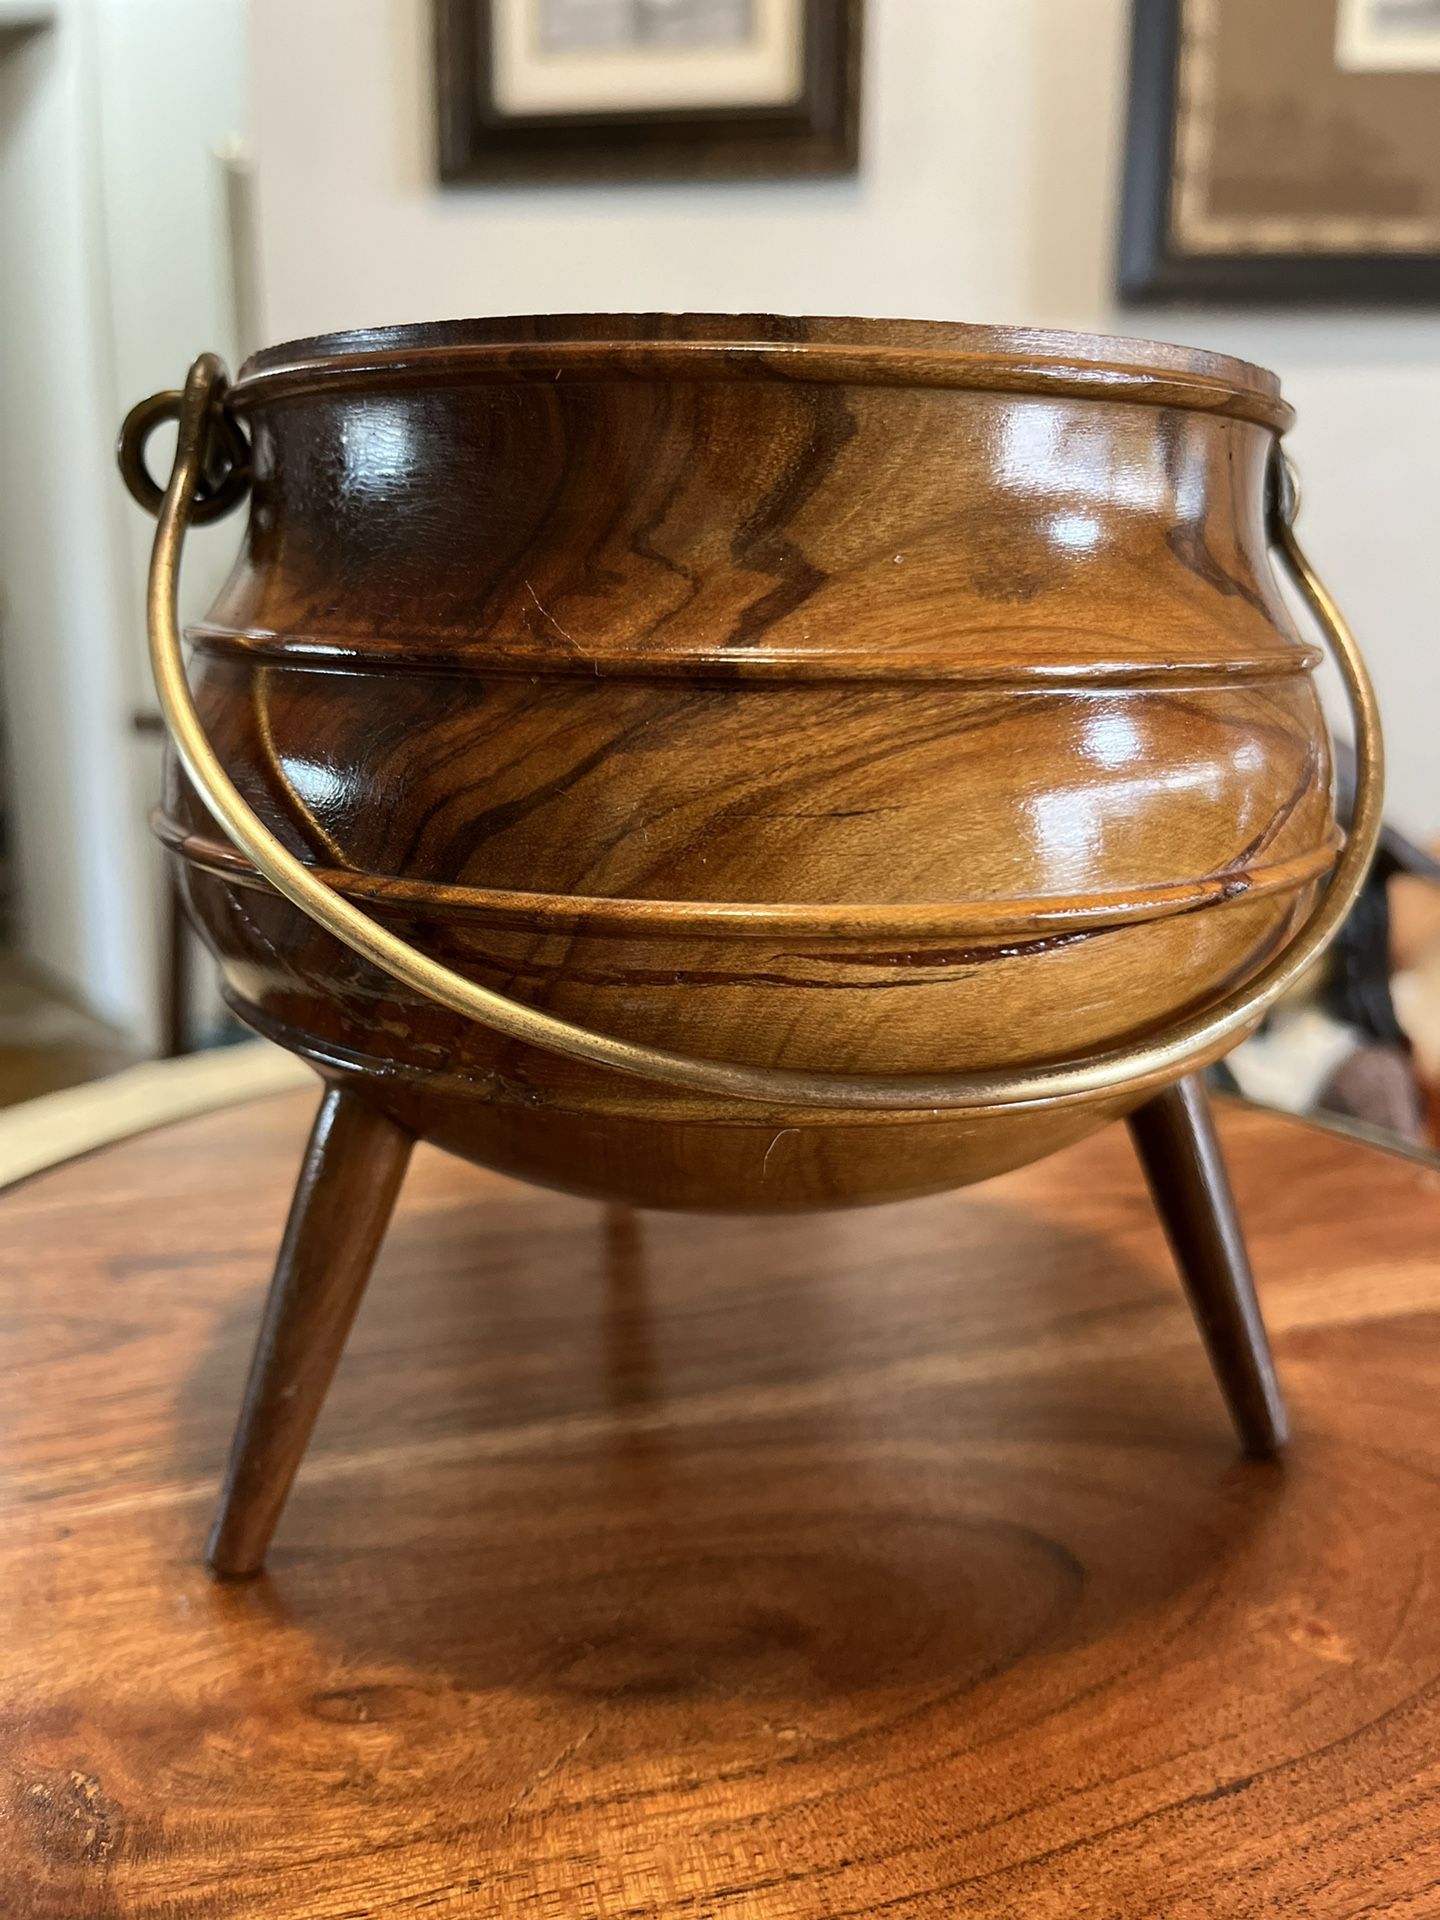 Gorgeous Wood Kettle Shaped Bowl With Brass Handle- 5" Wide With Three Spindle Legs